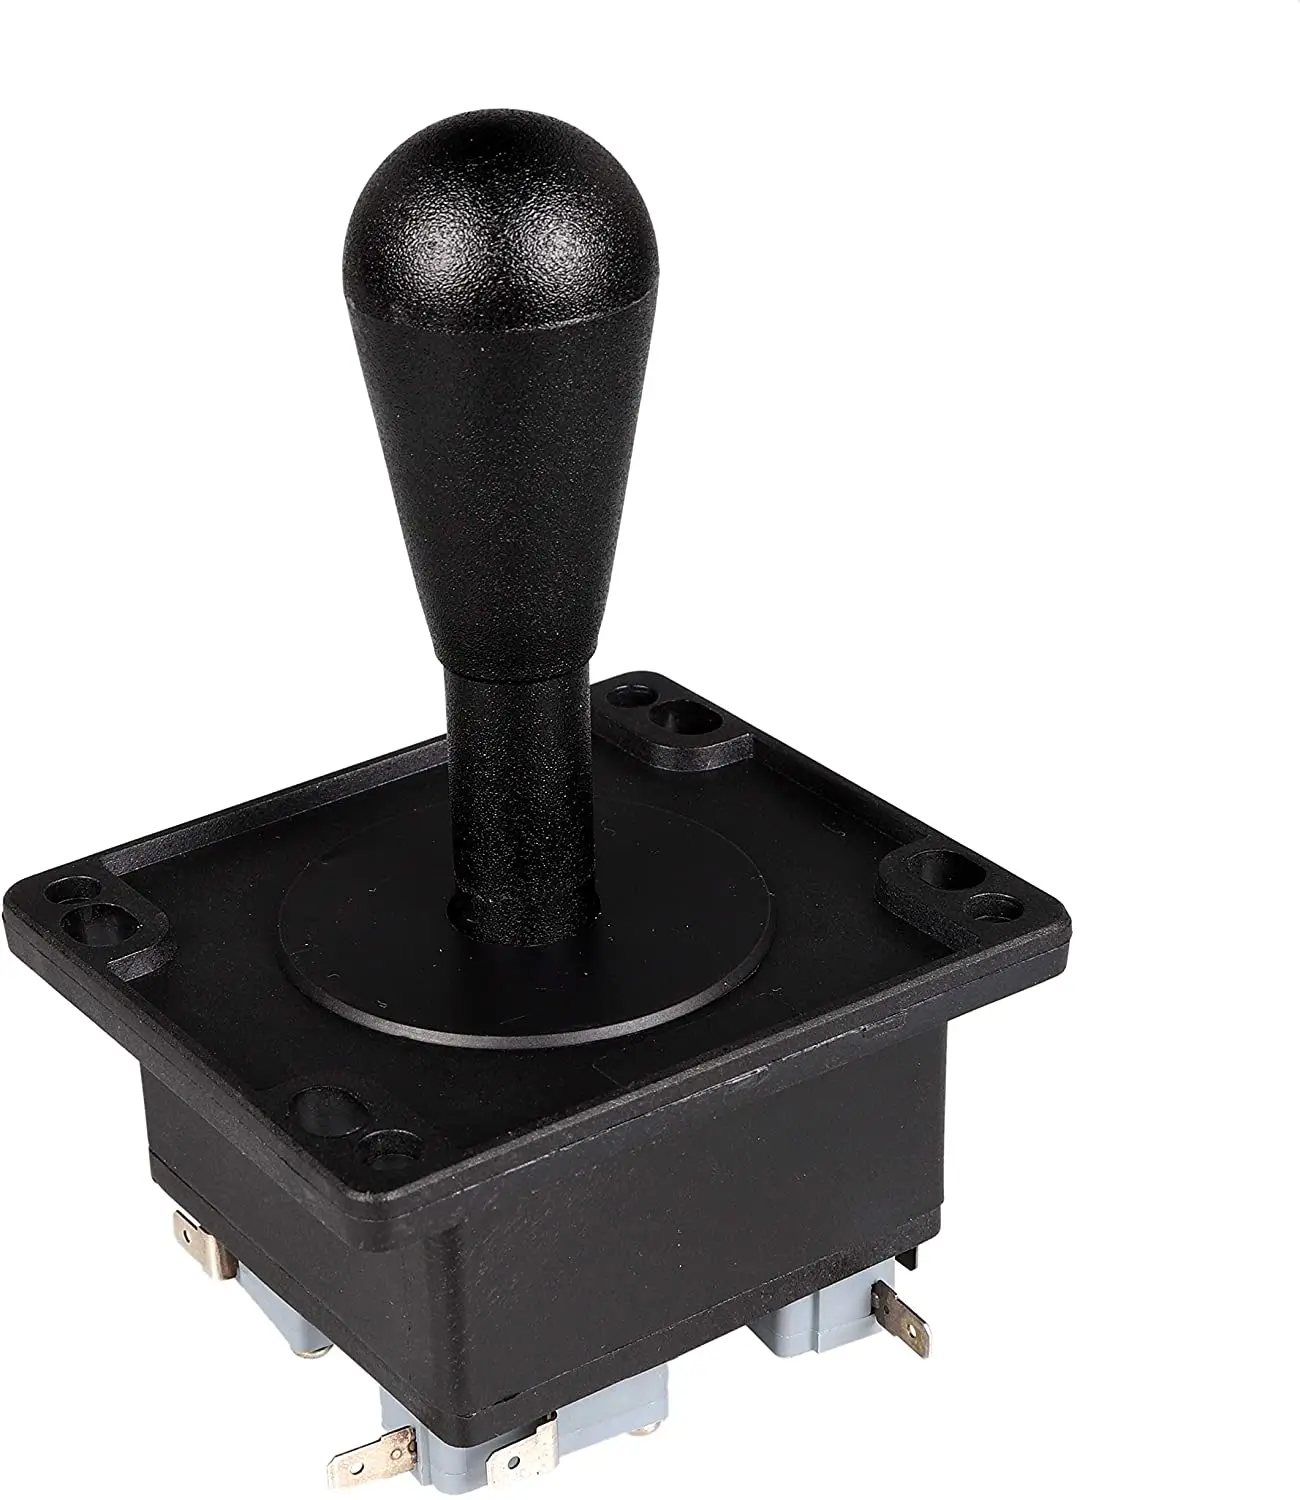 EG STARTS American Style Arcade Competition 2Pin Bat Joystick Switchable From 8 Ways Elliptical Handle, Precision 8-Way 187